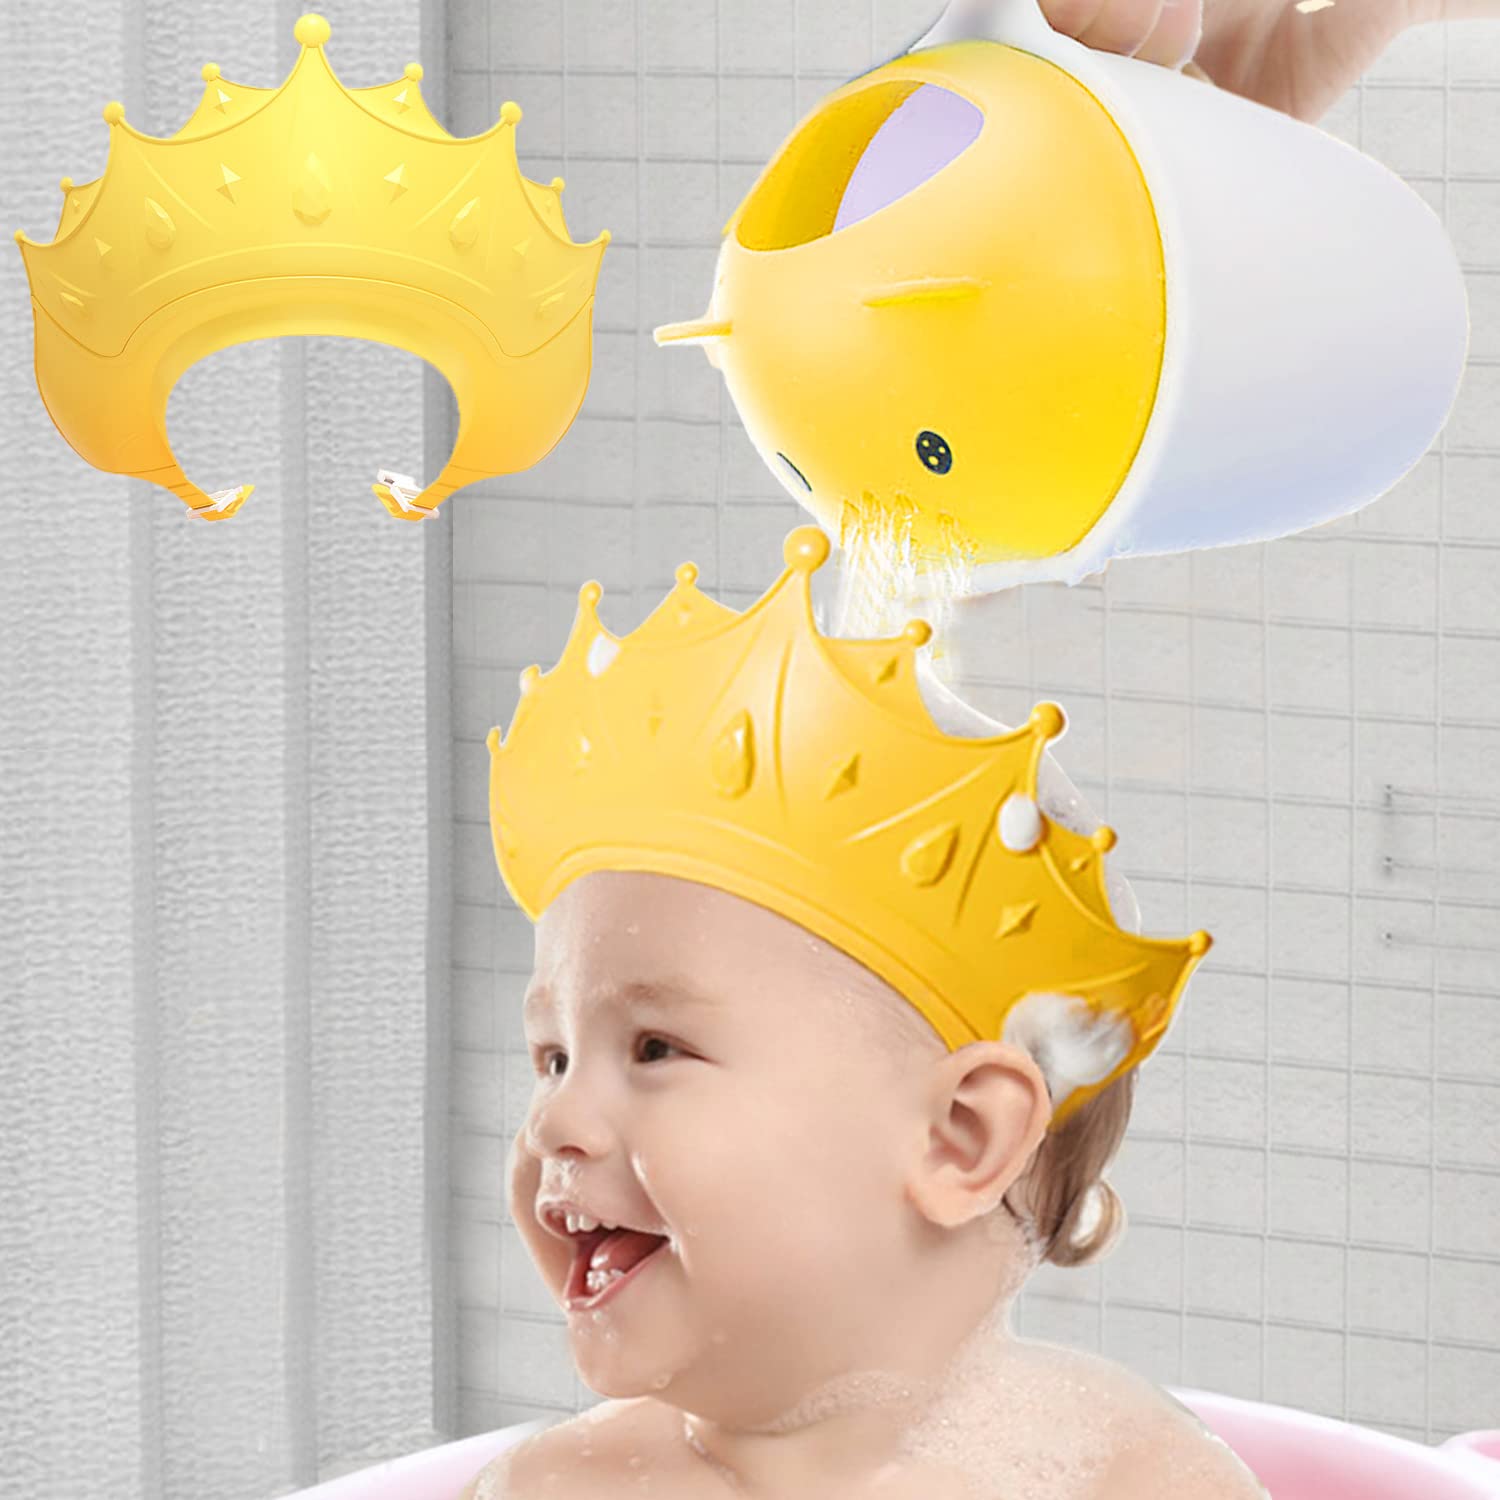 Baby Shower Cap Shampoo Hat Shower Sun Hat Soft Adjustable Head Protection Shampoo Hat Kids Baby Toddler Girls Shampoo Guard Shower Accessories Protect Baby Eye Ears (Yellow)